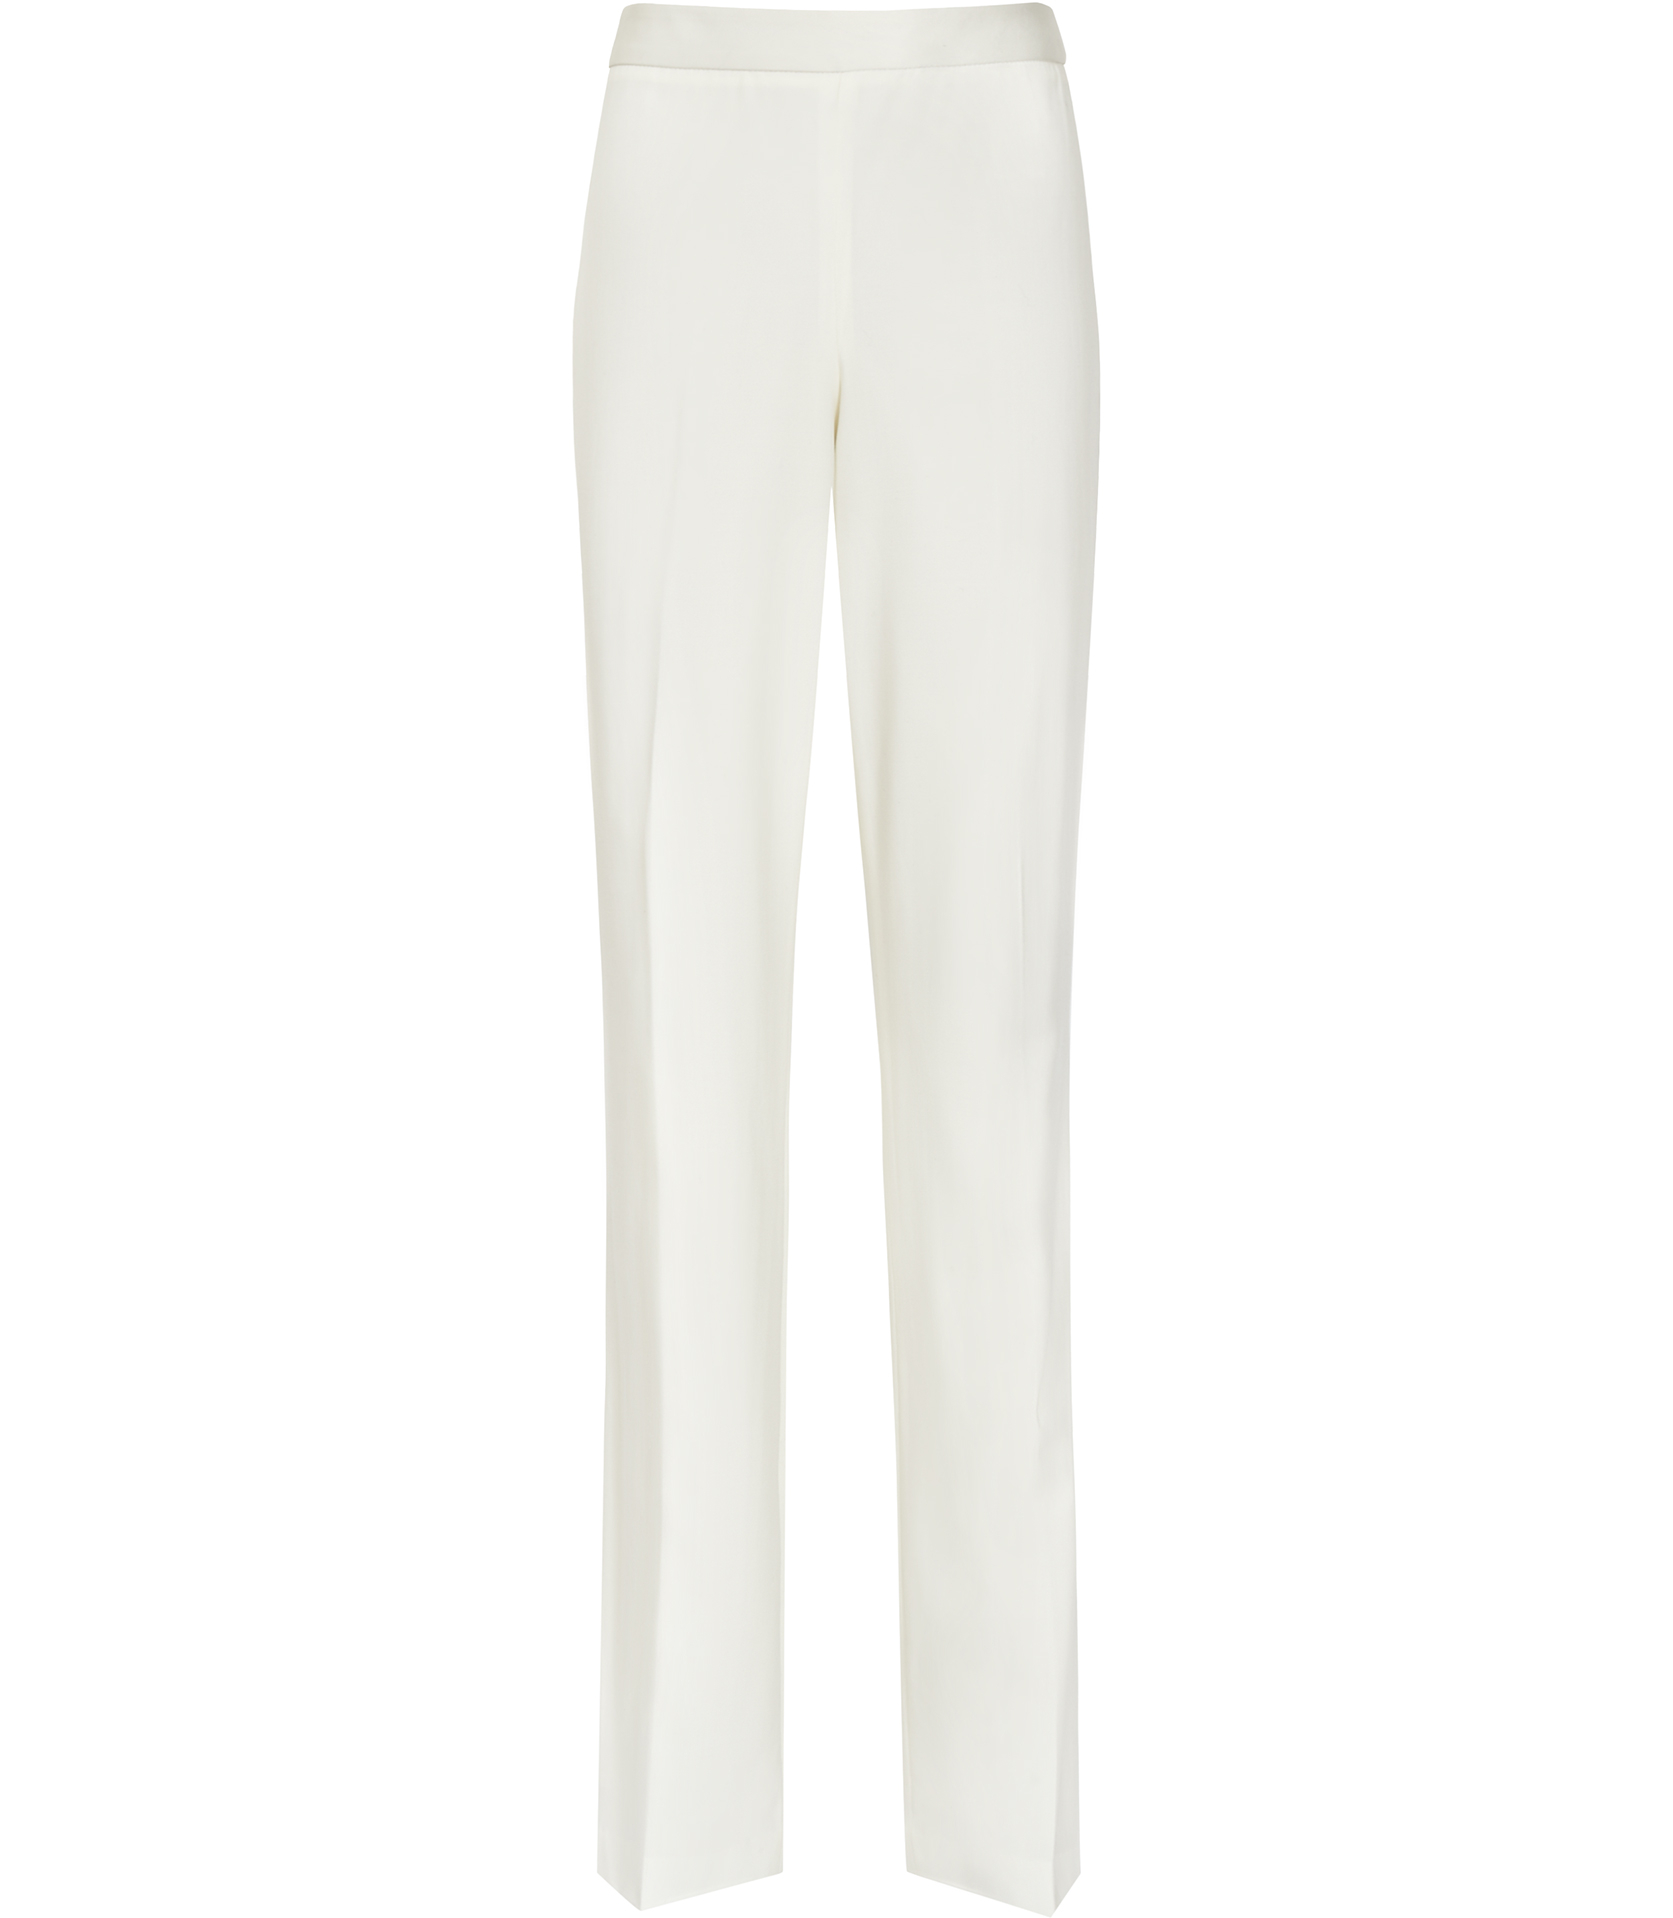 Reiss Michelle High-Waisted Trousers in Cream (Natural) - Lyst